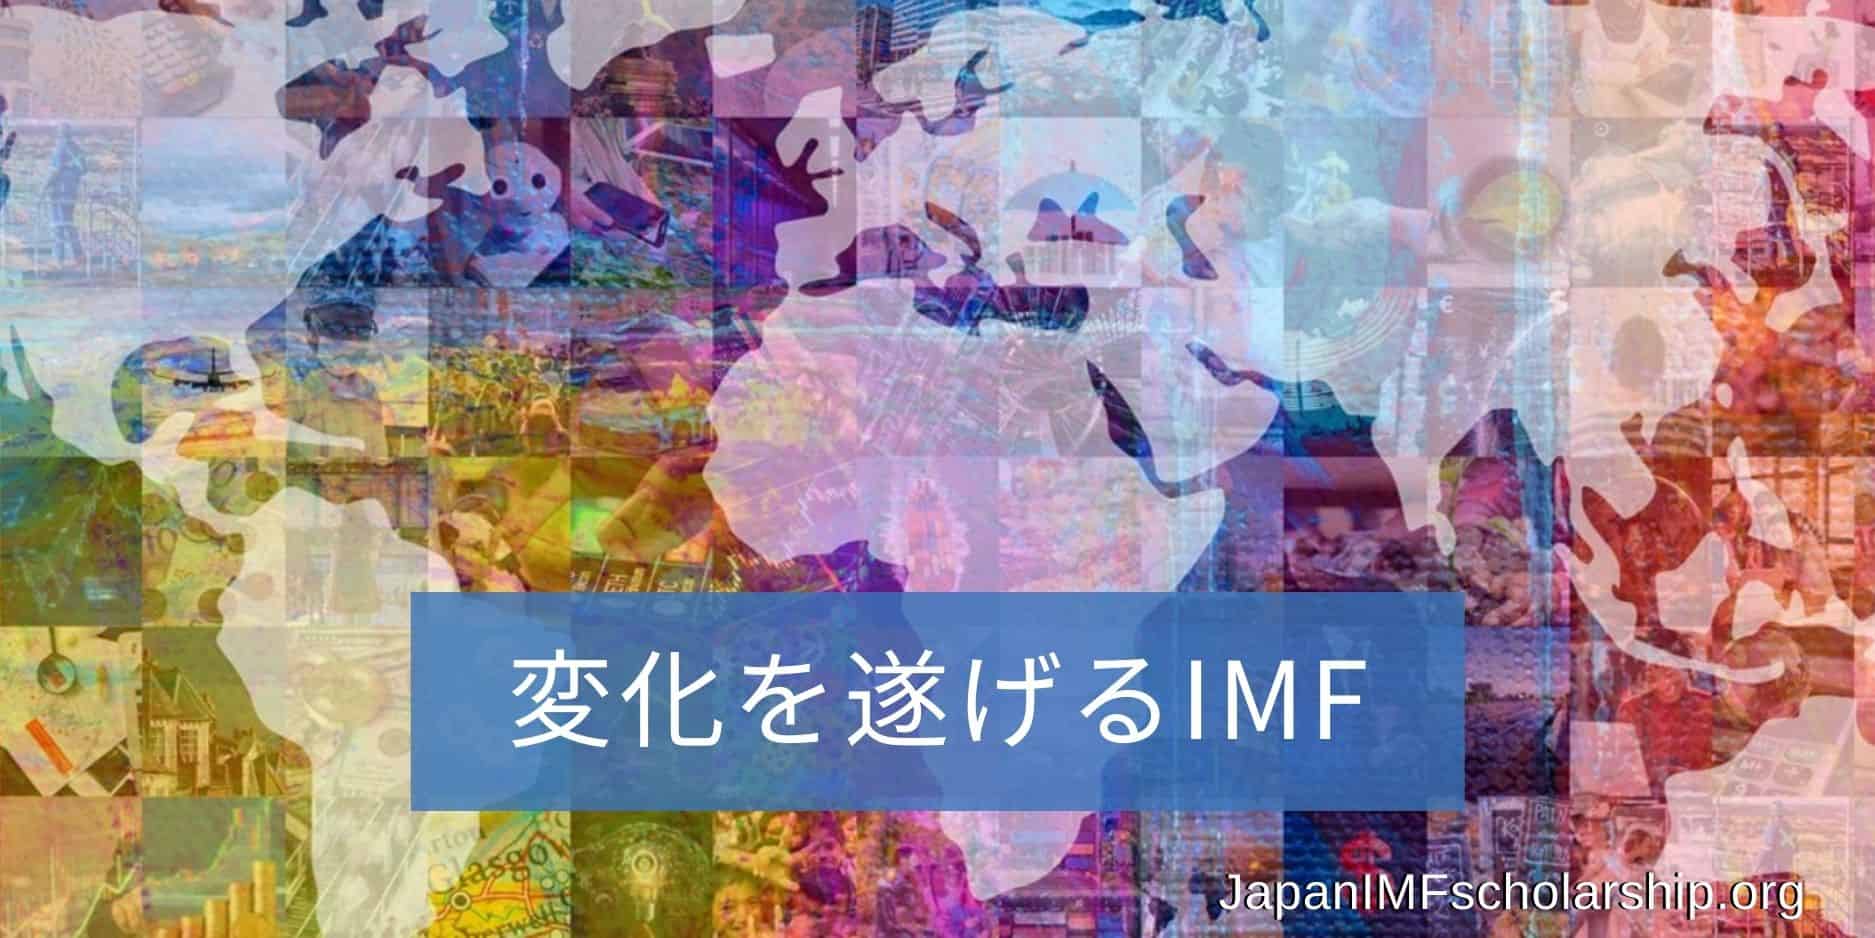 jisp imf blog how the imf Continues to change to confront global challenges